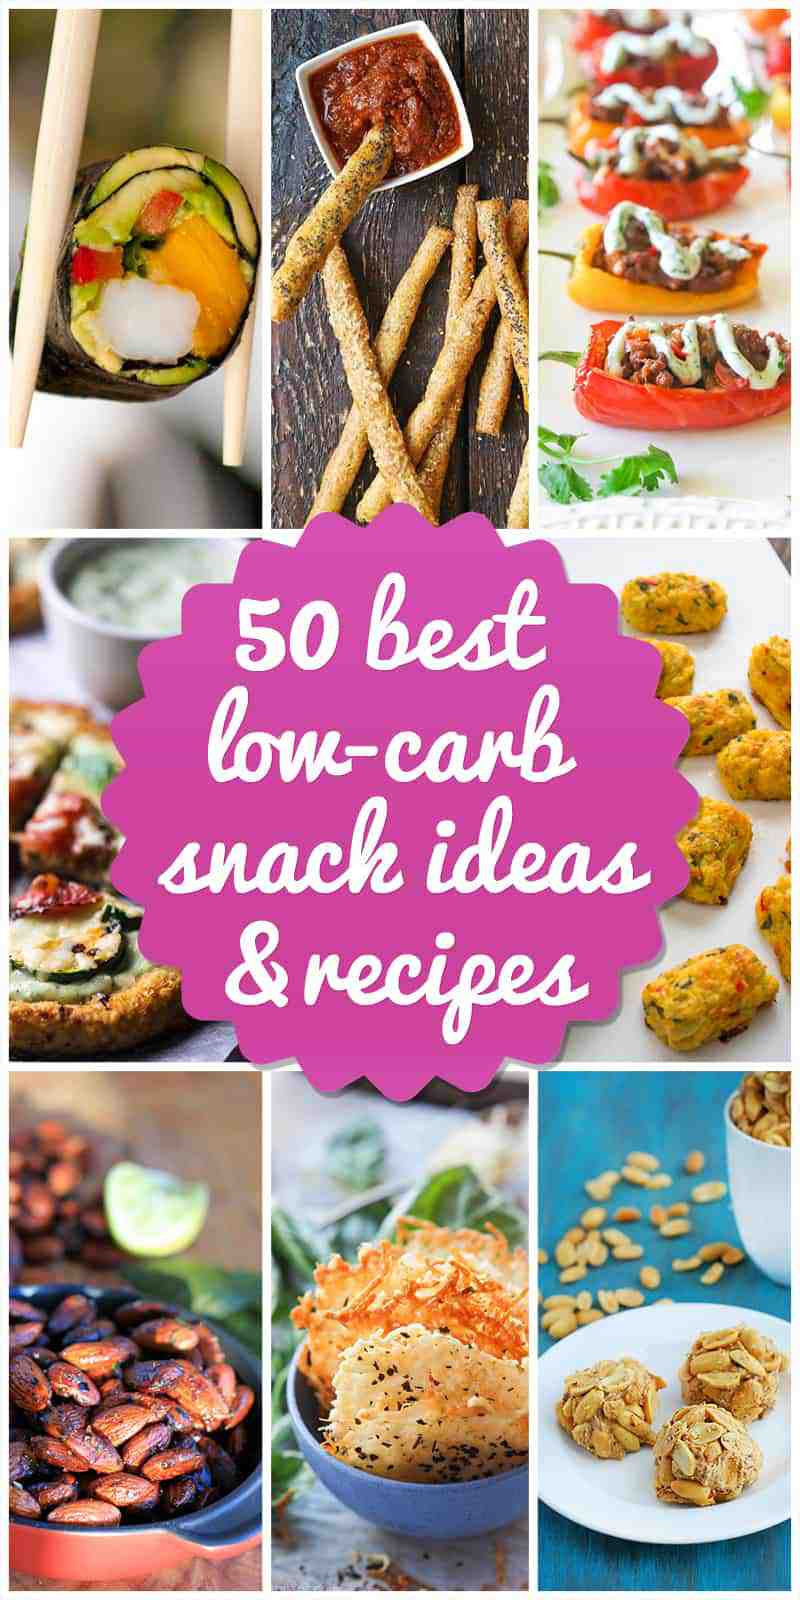 Healthy Carb Free Snacks
 50 Low Carb Snack Ideas and Recipes for 2018